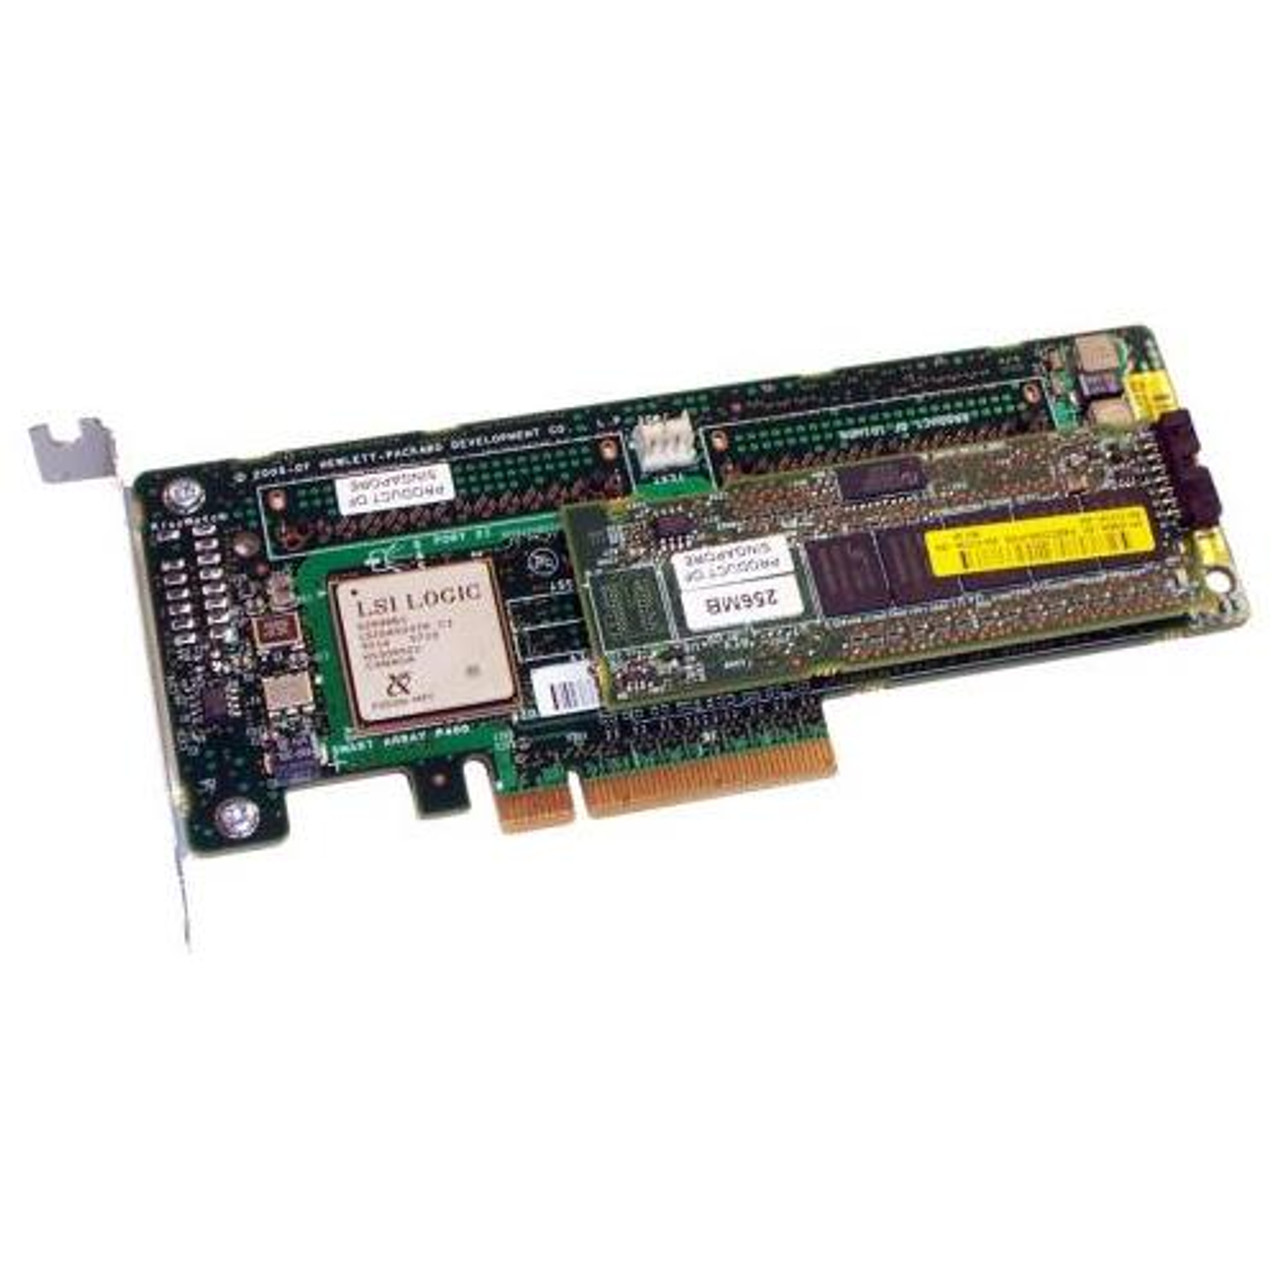 013159-002 HP Smart Array P400 PCI-Express 8-Channel Serial Attached SCSI (SAS) RAID Controller Card with 256MB BBWC (Battery Backed Write